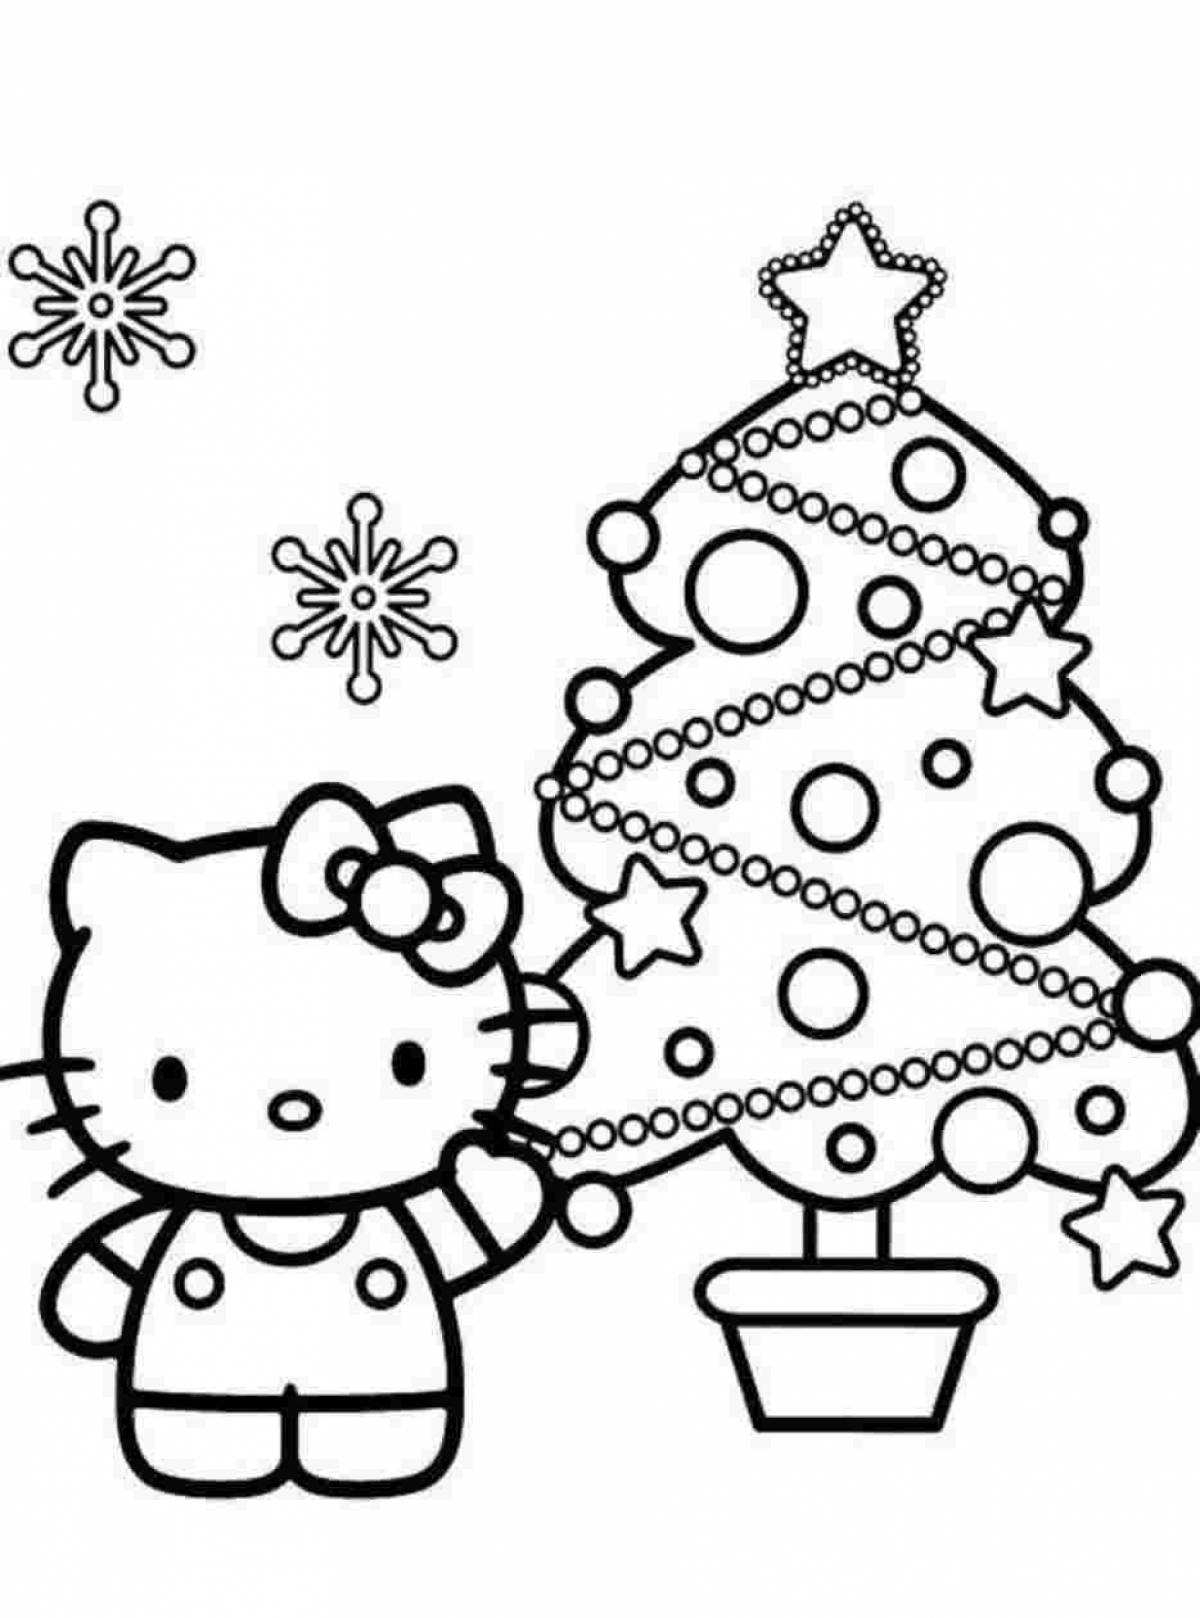 Exquisite cute christmas coloring book